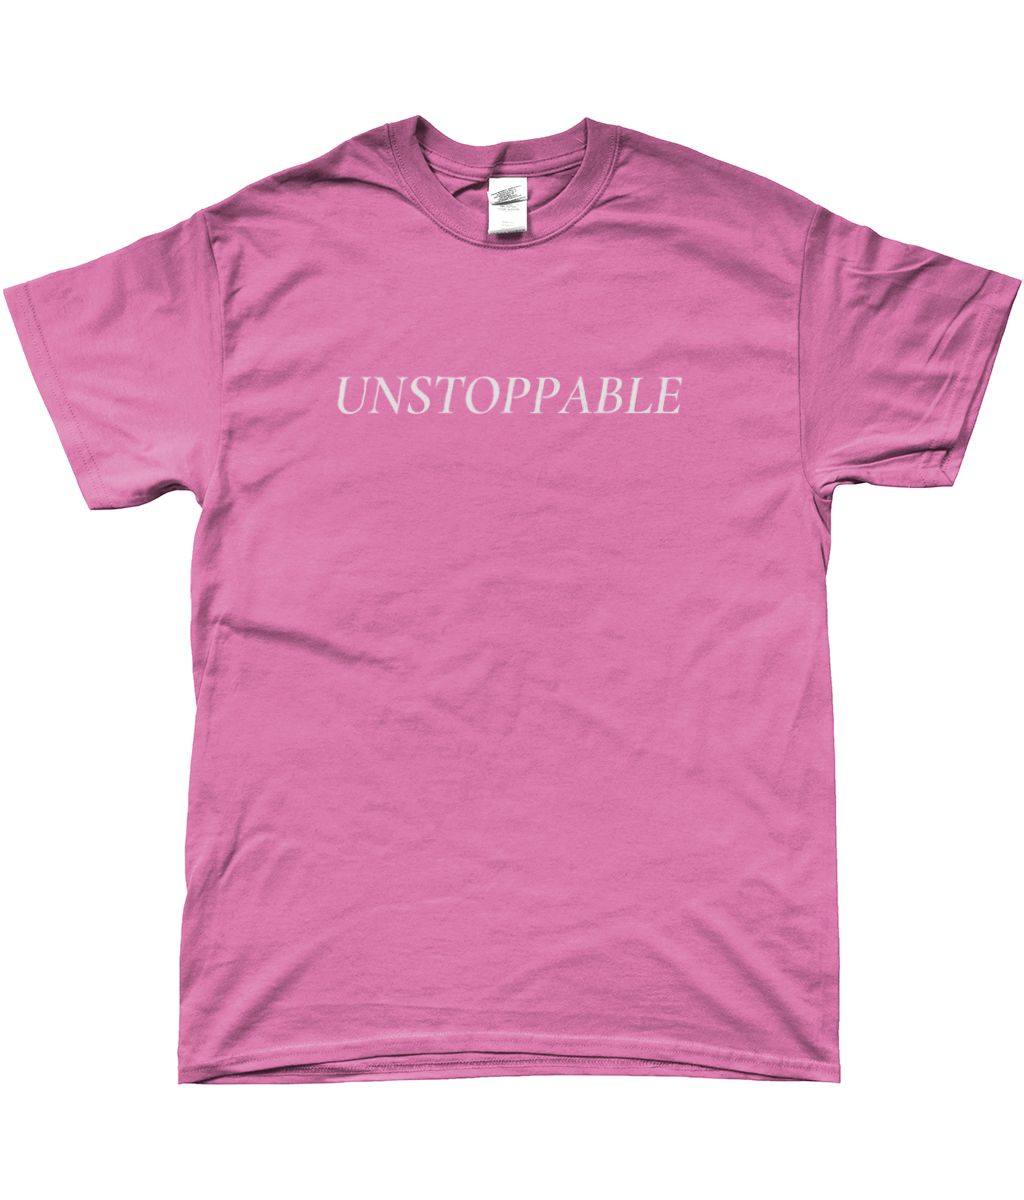 UNSTOPPABLE T-SHIRT